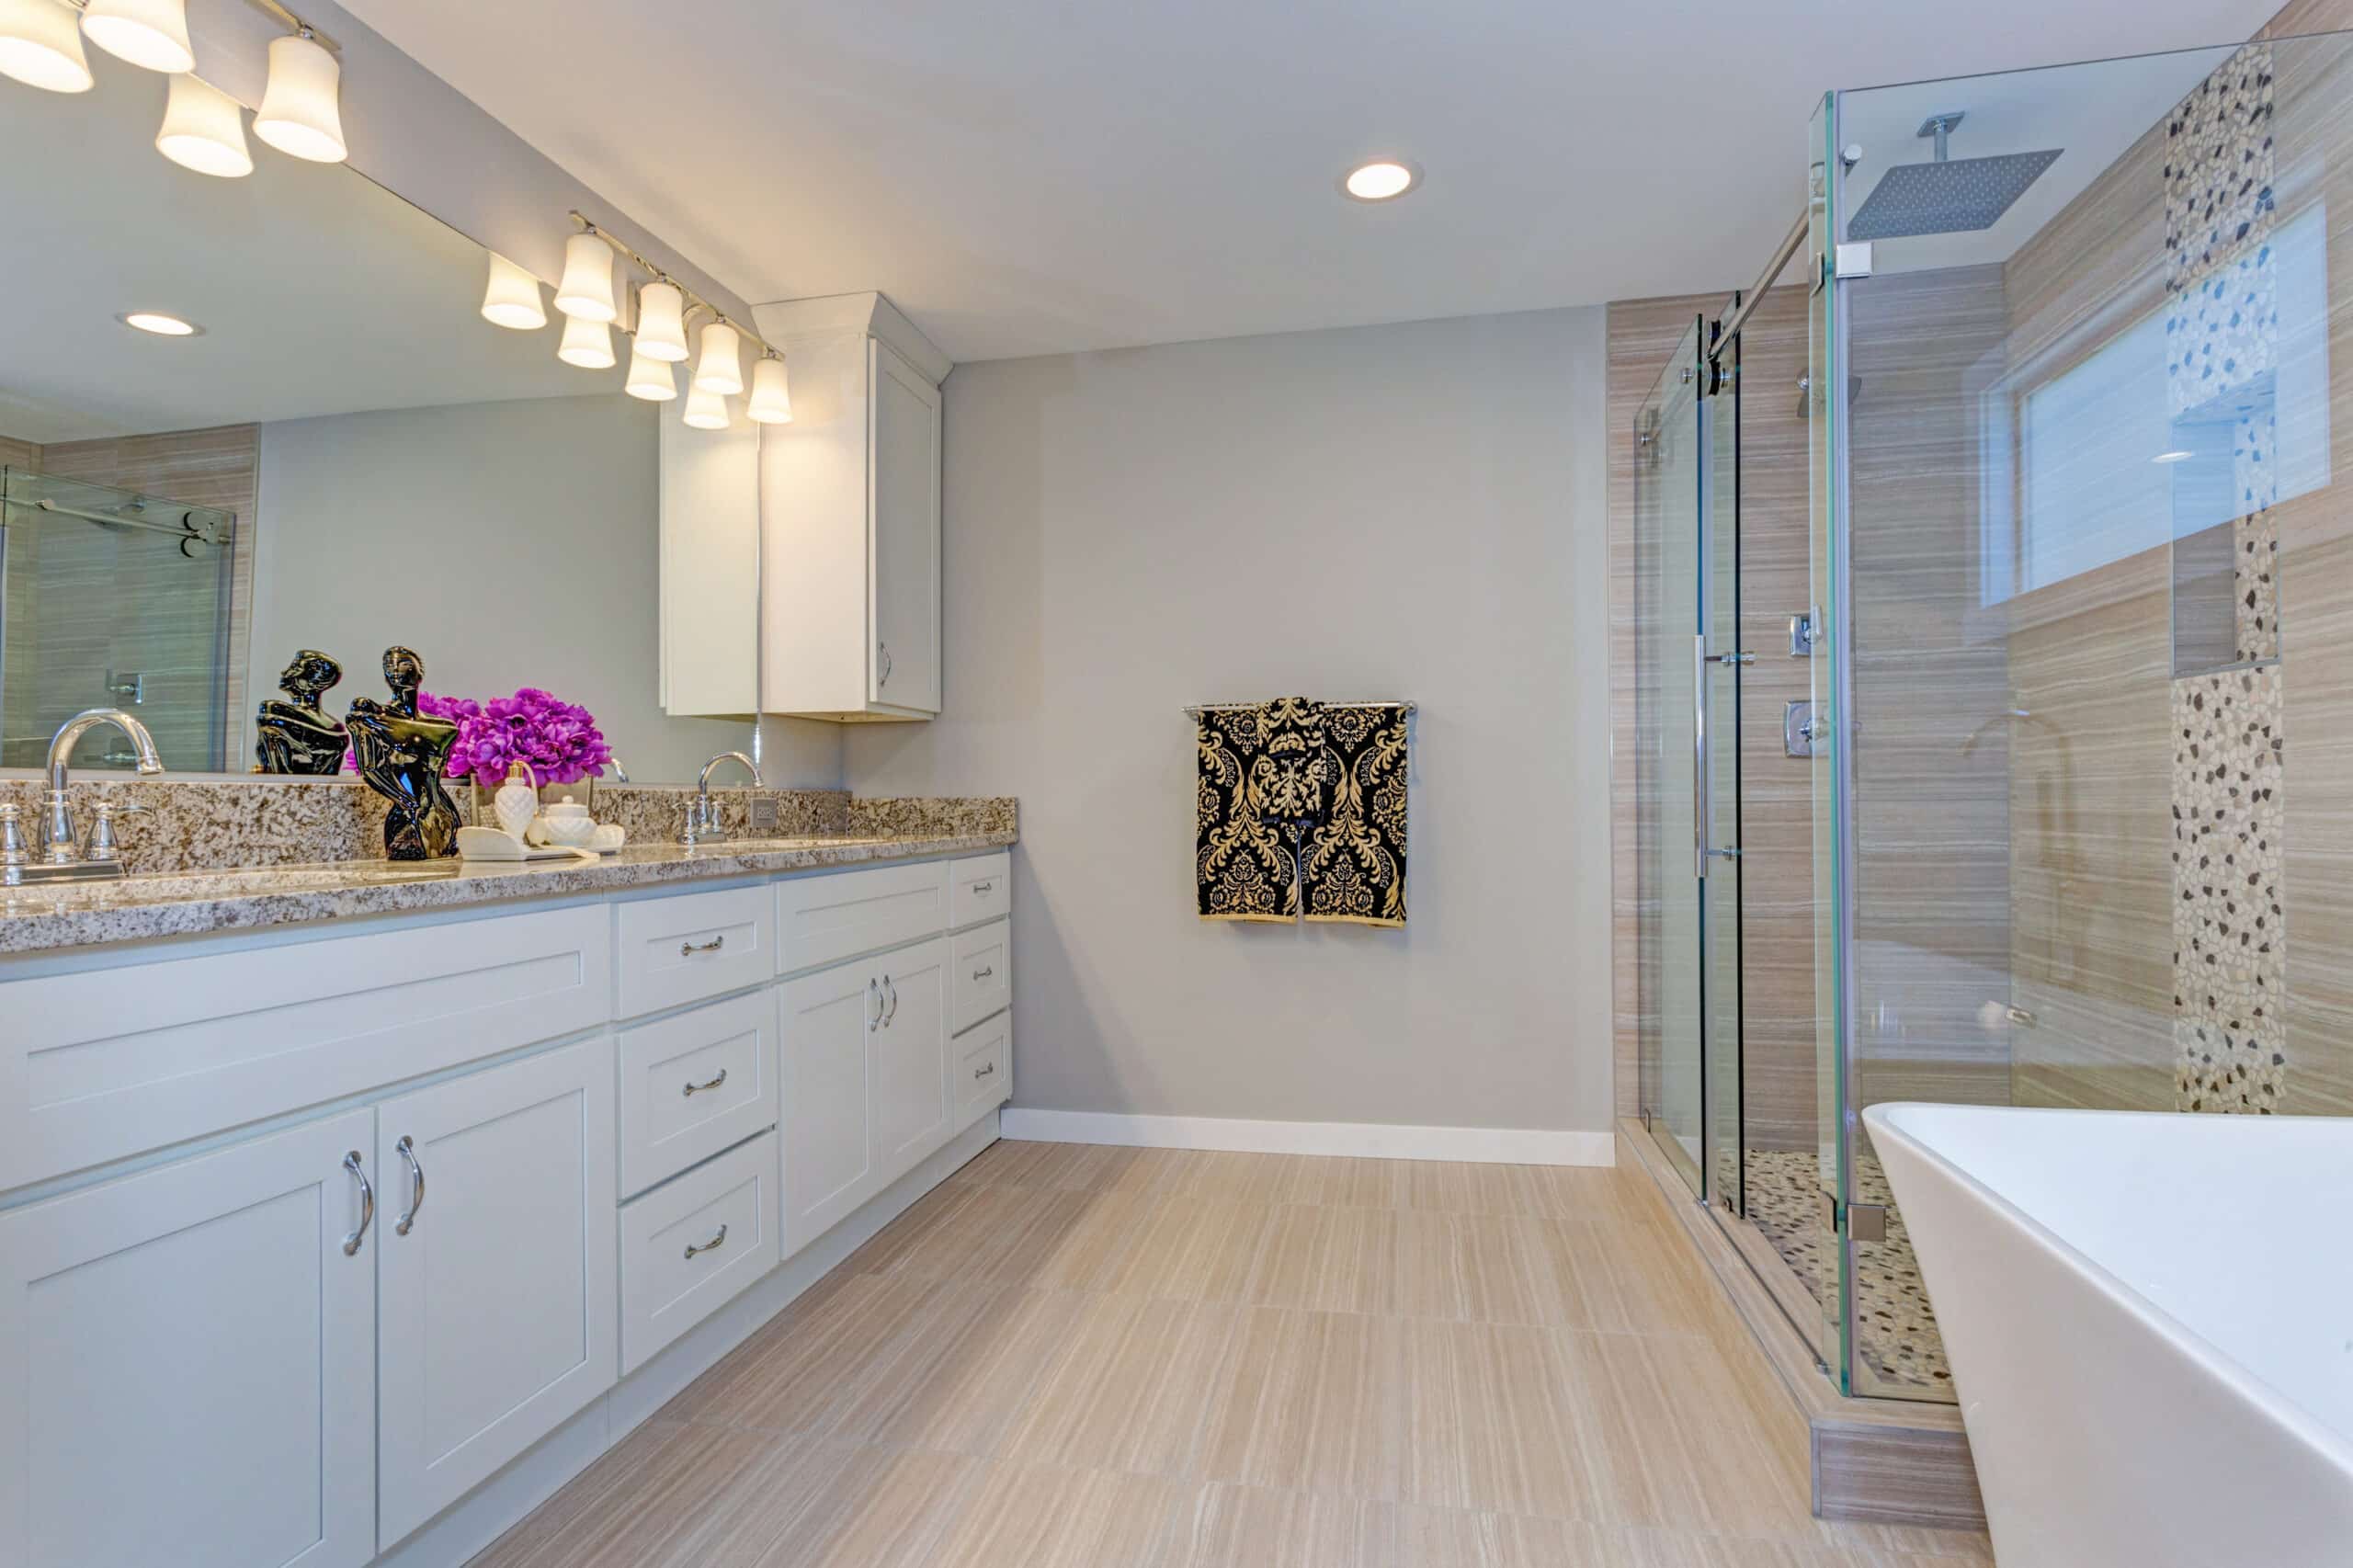 Luxurious bathroom style with big glass enclosed shower, a bath tub, and a modern white shaker double-sink vanity with brown countertop